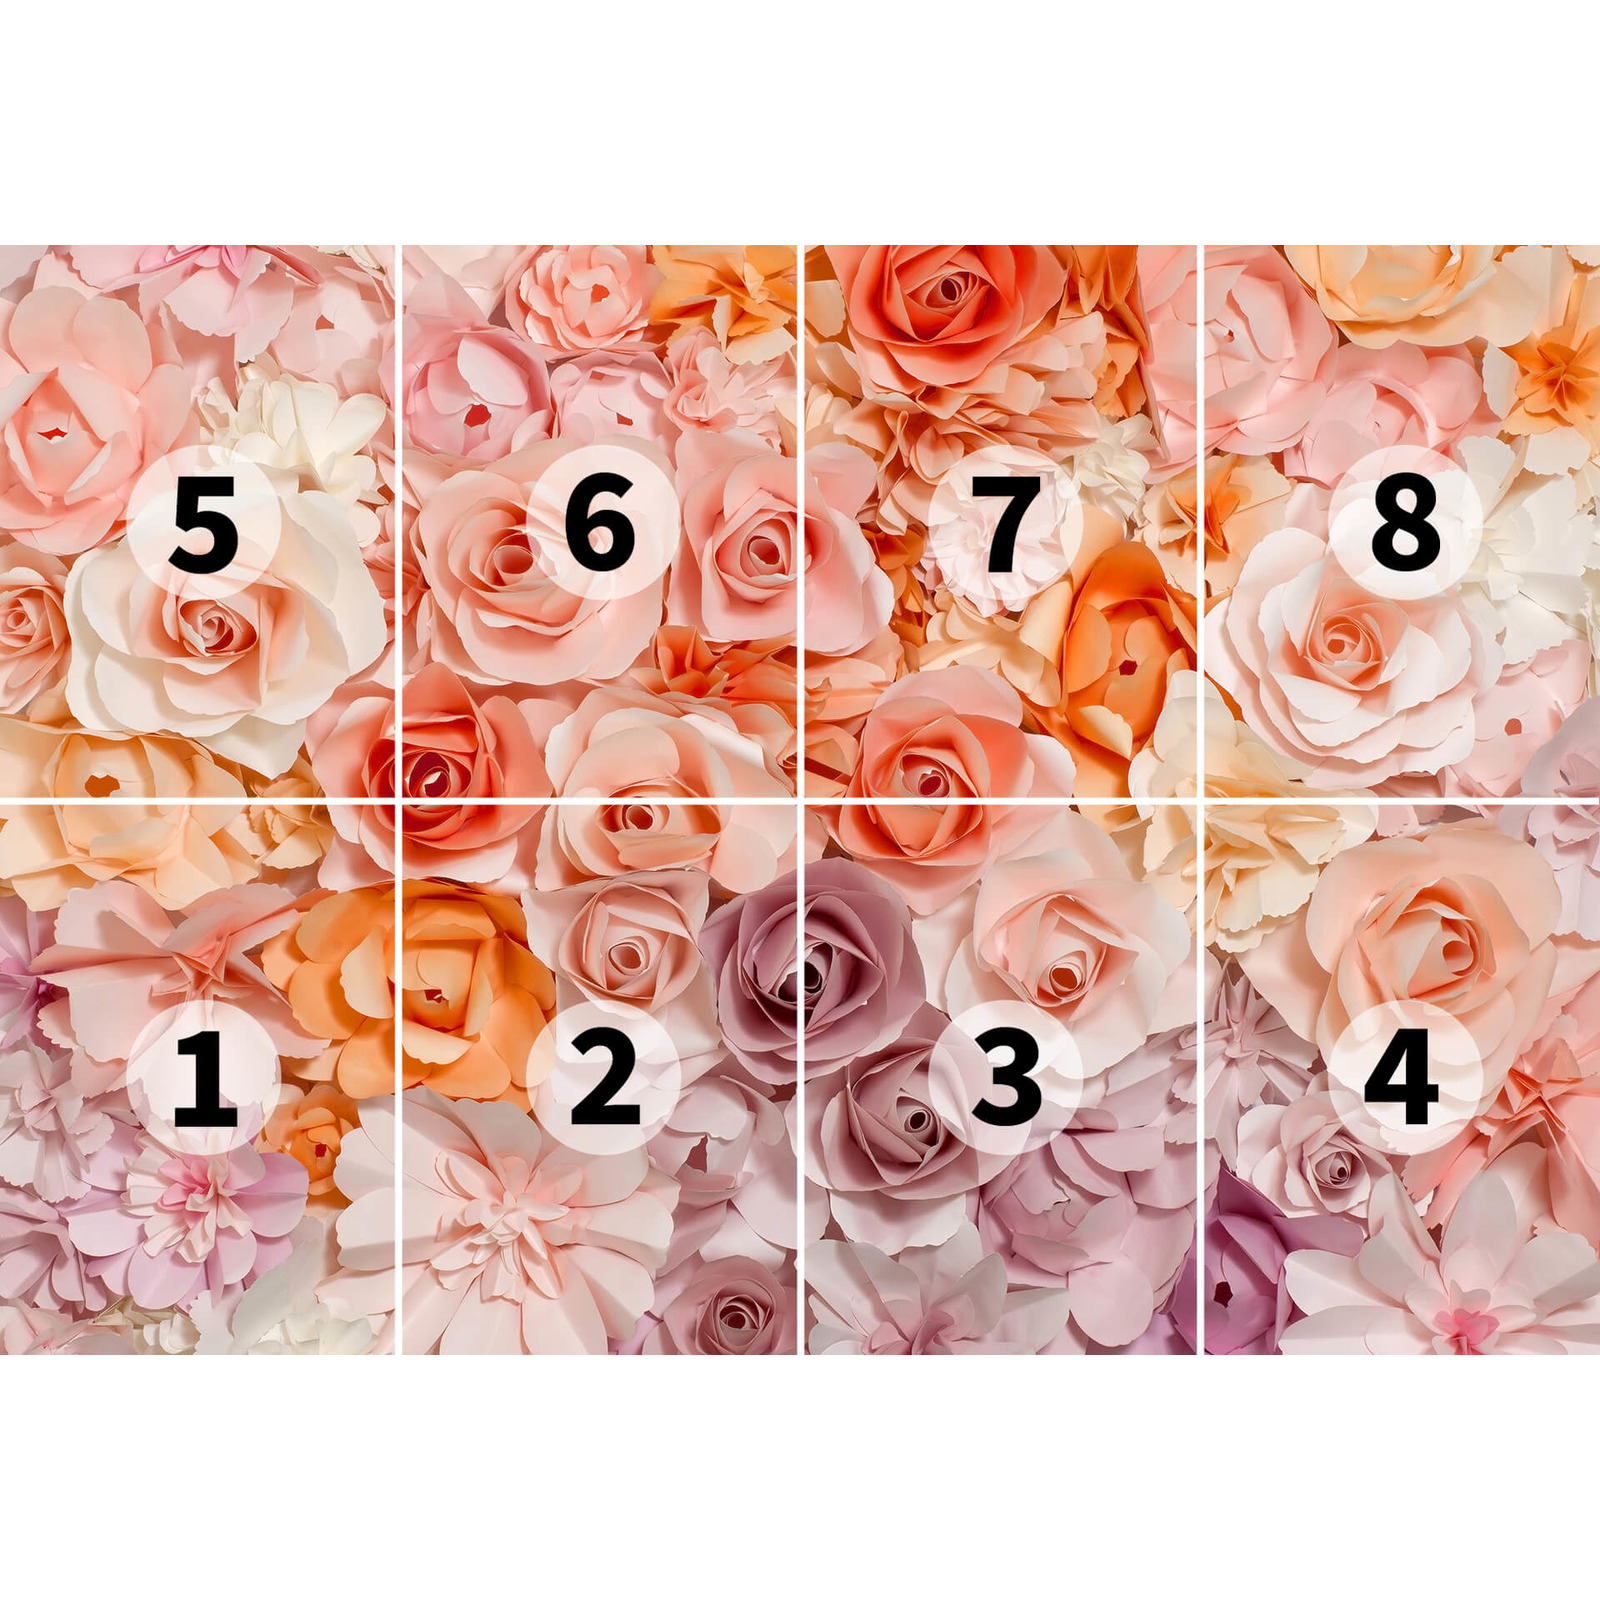             3D Photo wallpaper with rose petals pattern - pink, white
        